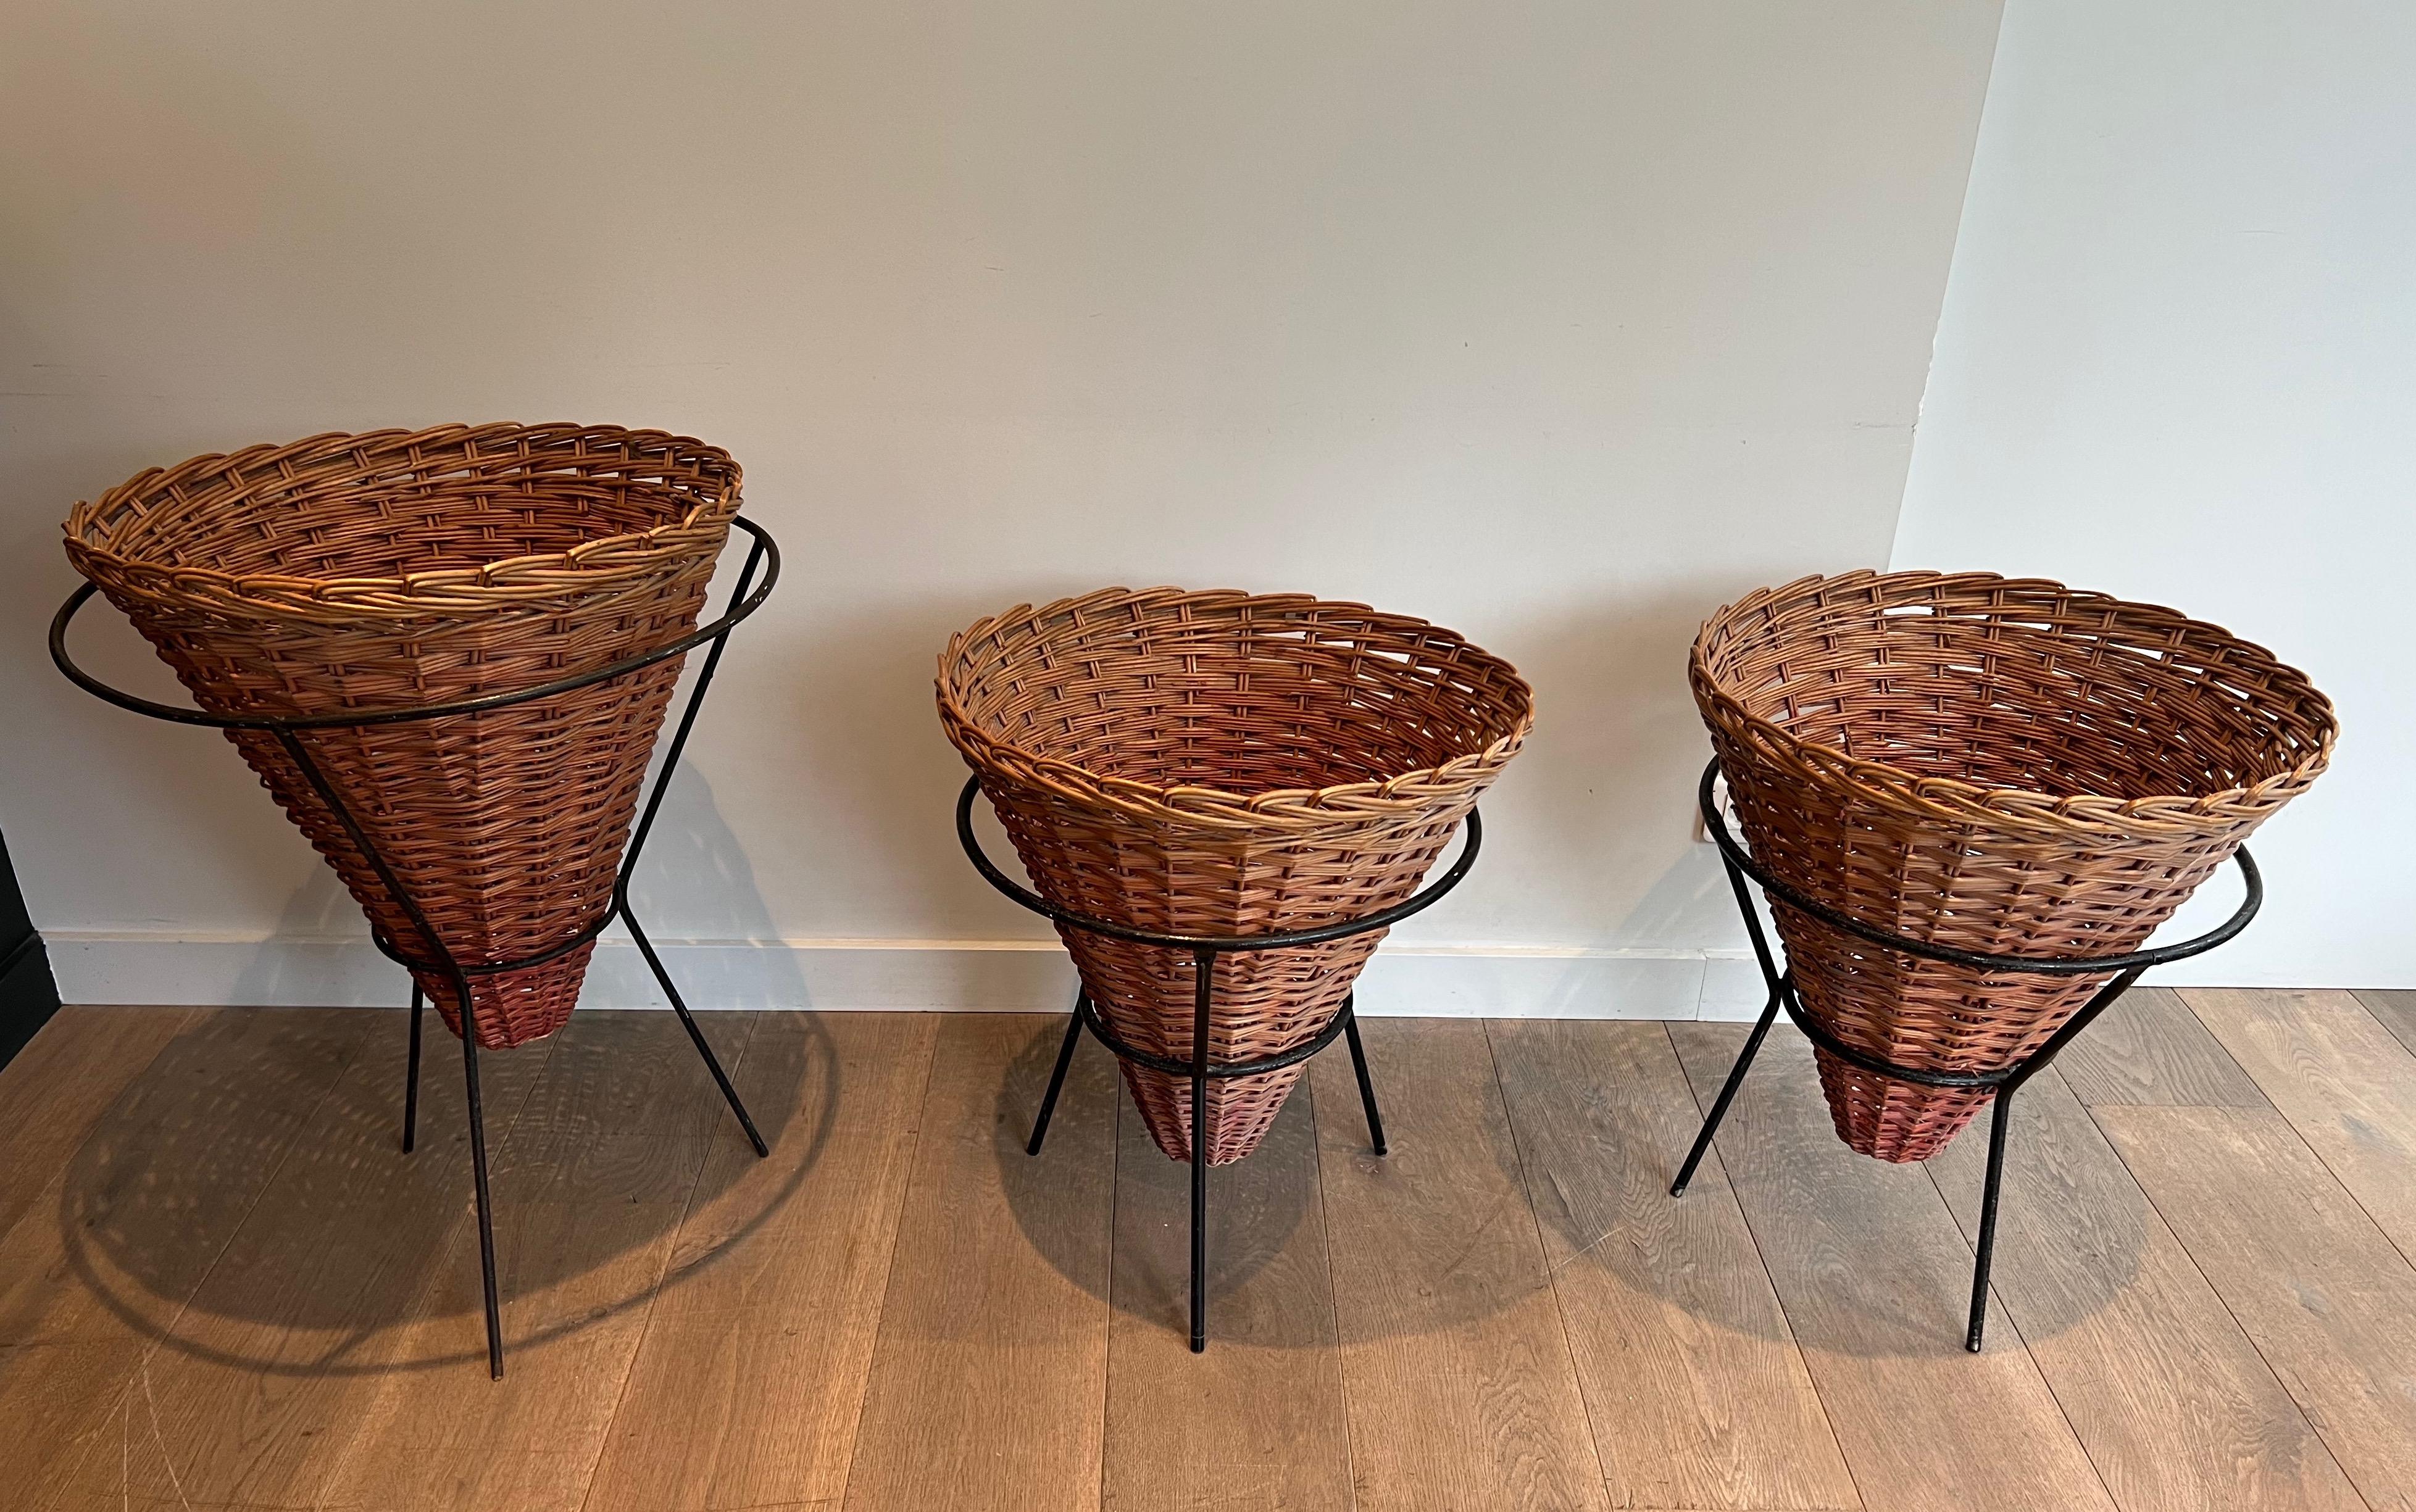 Set of Three Black Lacquered Metal and Rattan Planters, French Work, circa 1950 For Sale 8